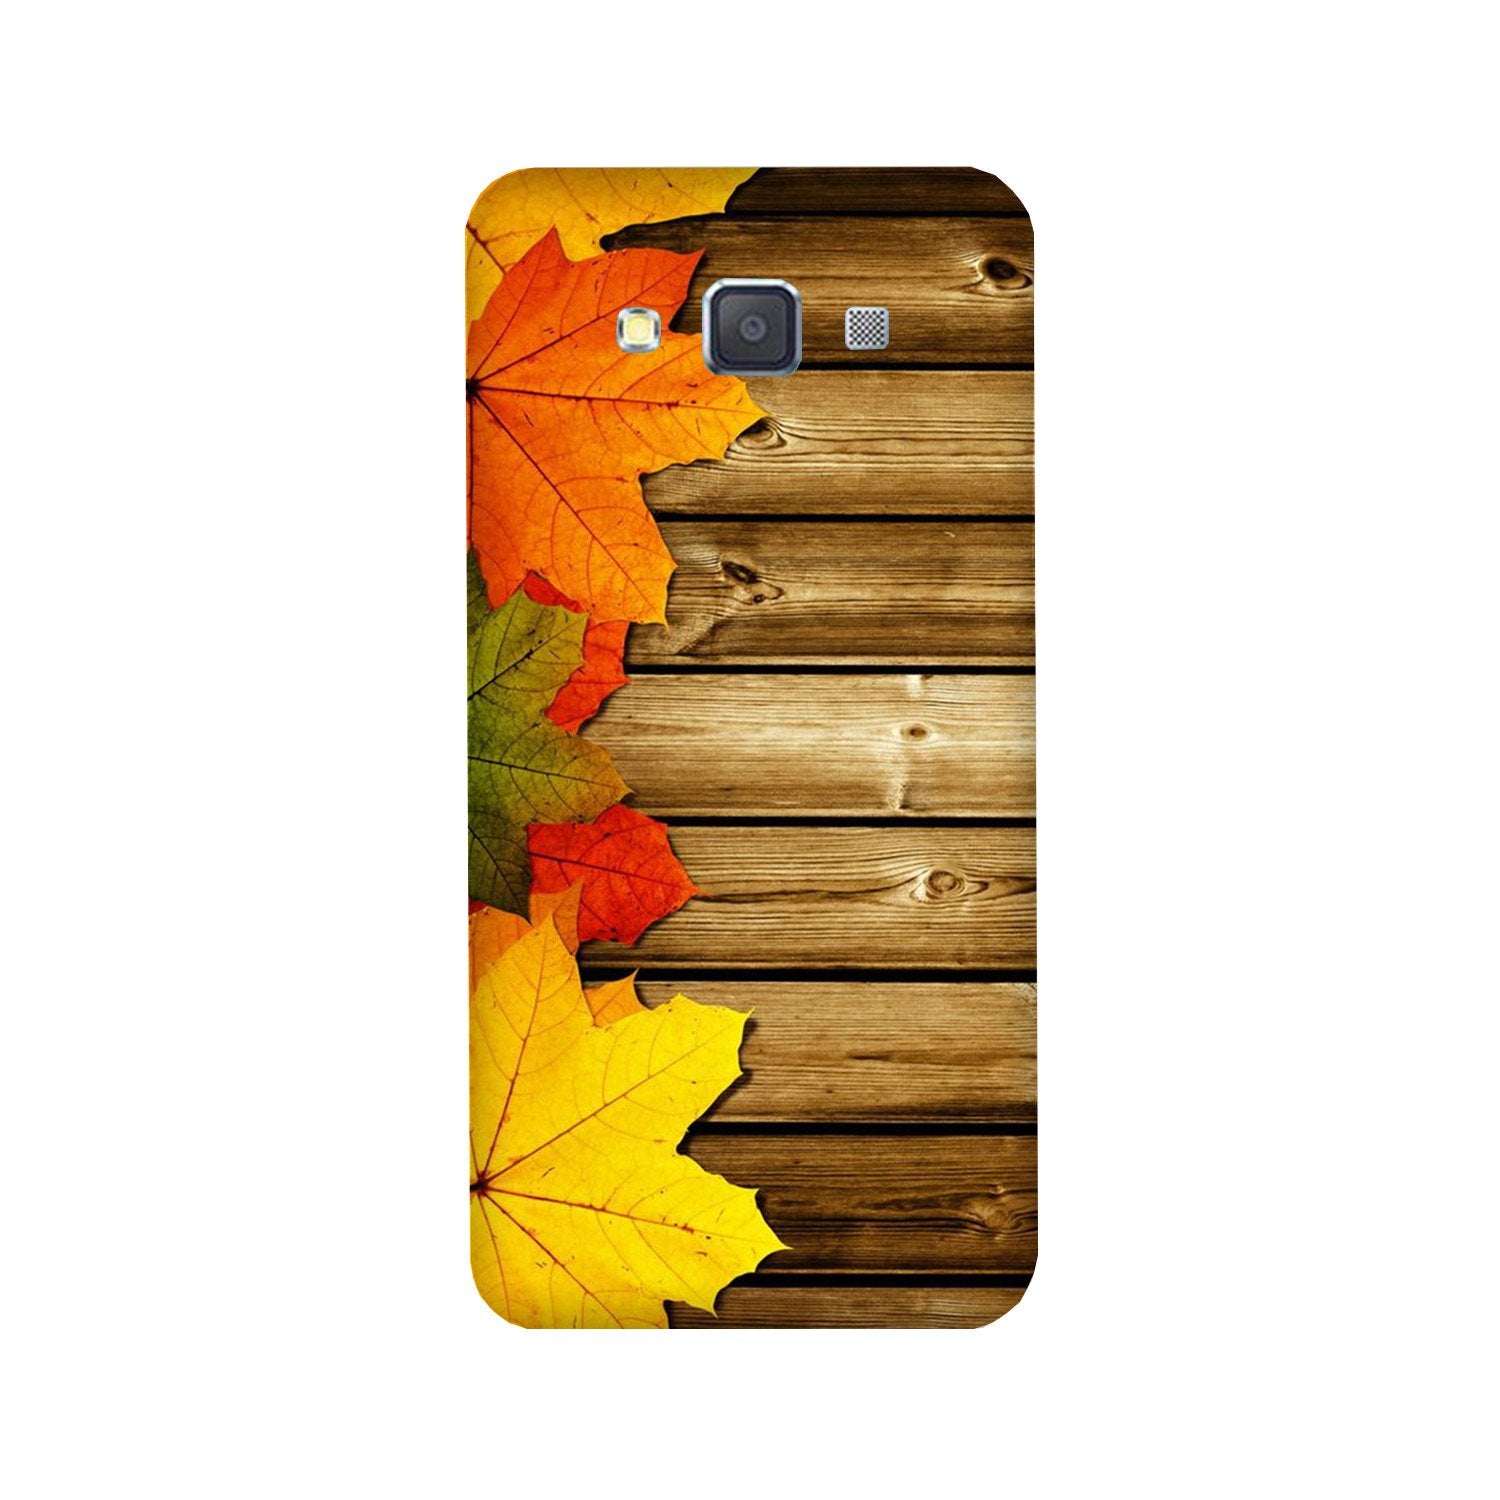 Wooden look3 Case for Galaxy Grand Max